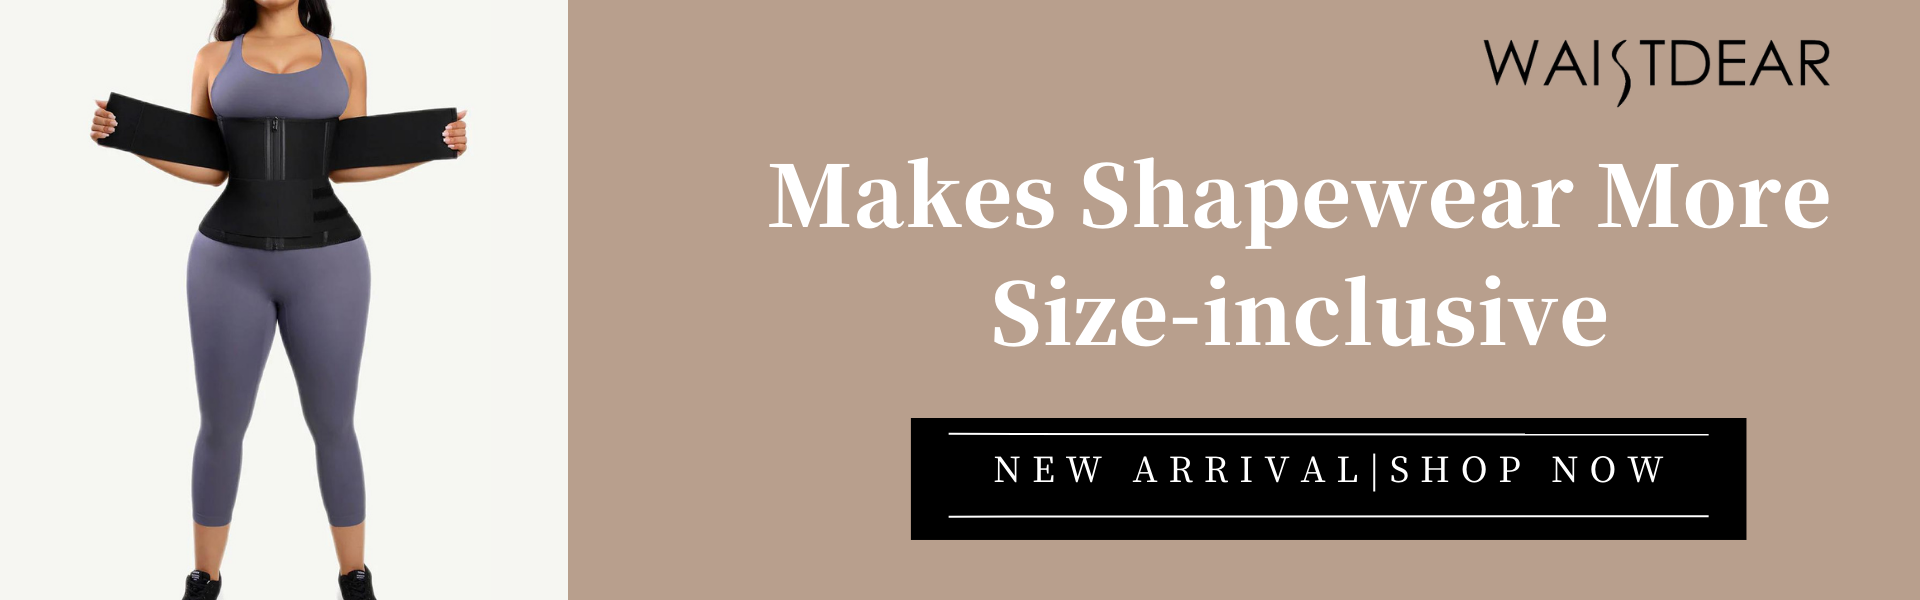 Waistdear Is Making Its Best Body Shaper to Be More Size-Inclusive